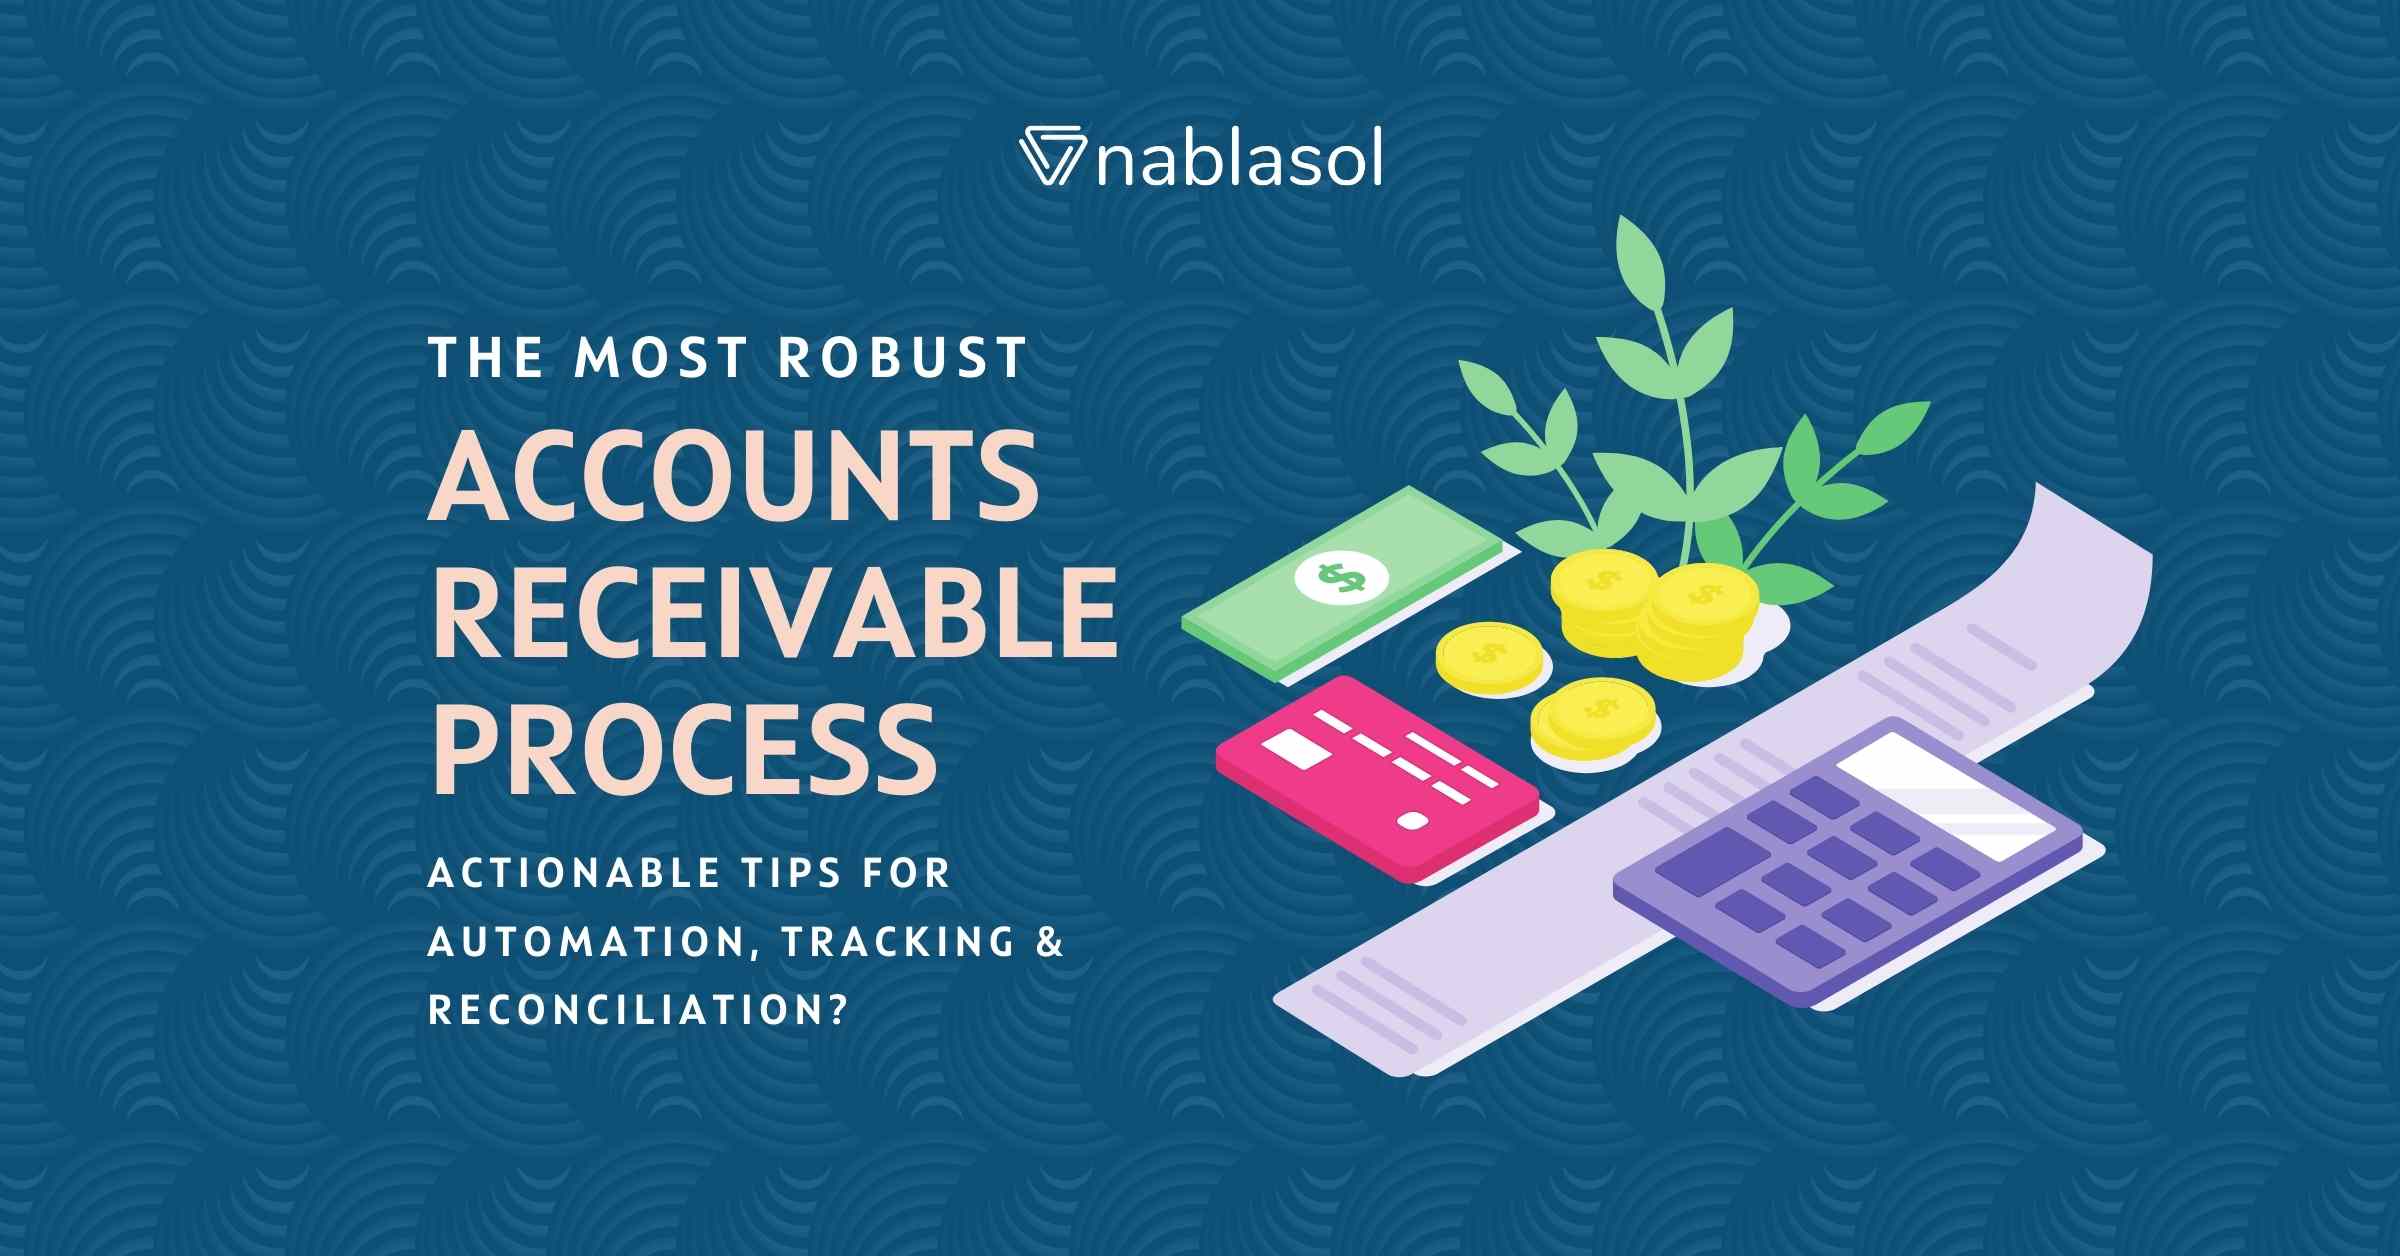 The Most Robust Accounts Receivable Process – Tips For Automation, Tracking & Reconciliation